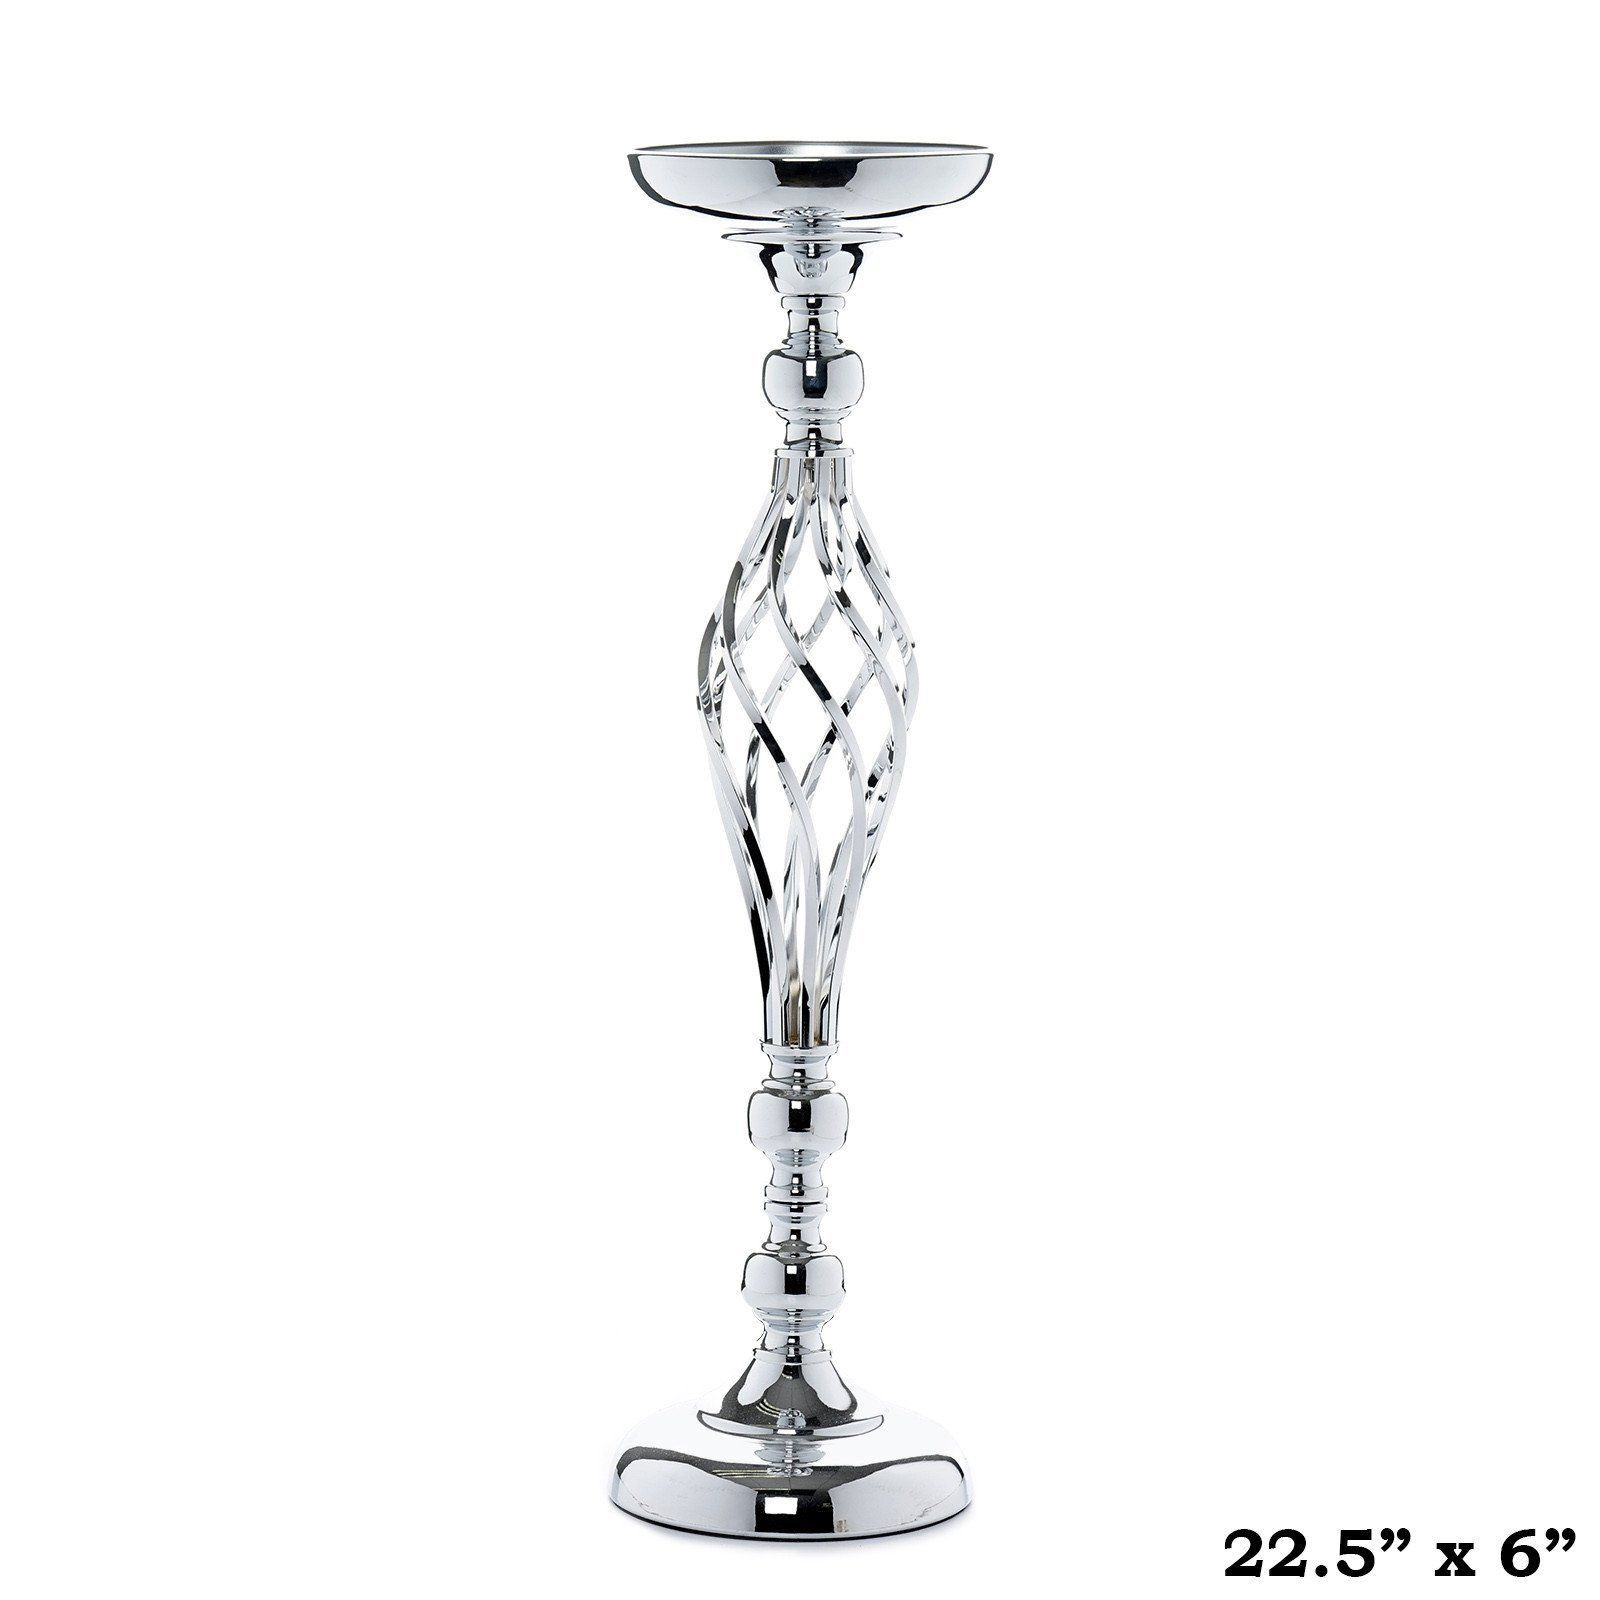 17 Perfect Glass Column Vase 2024 free download glass column vase of 22 5 tall metal flower decor candle holder vase buy 1 get 1 free in 22 5 tall metal flower decor candle holder vase buy 1 get 1 free silver